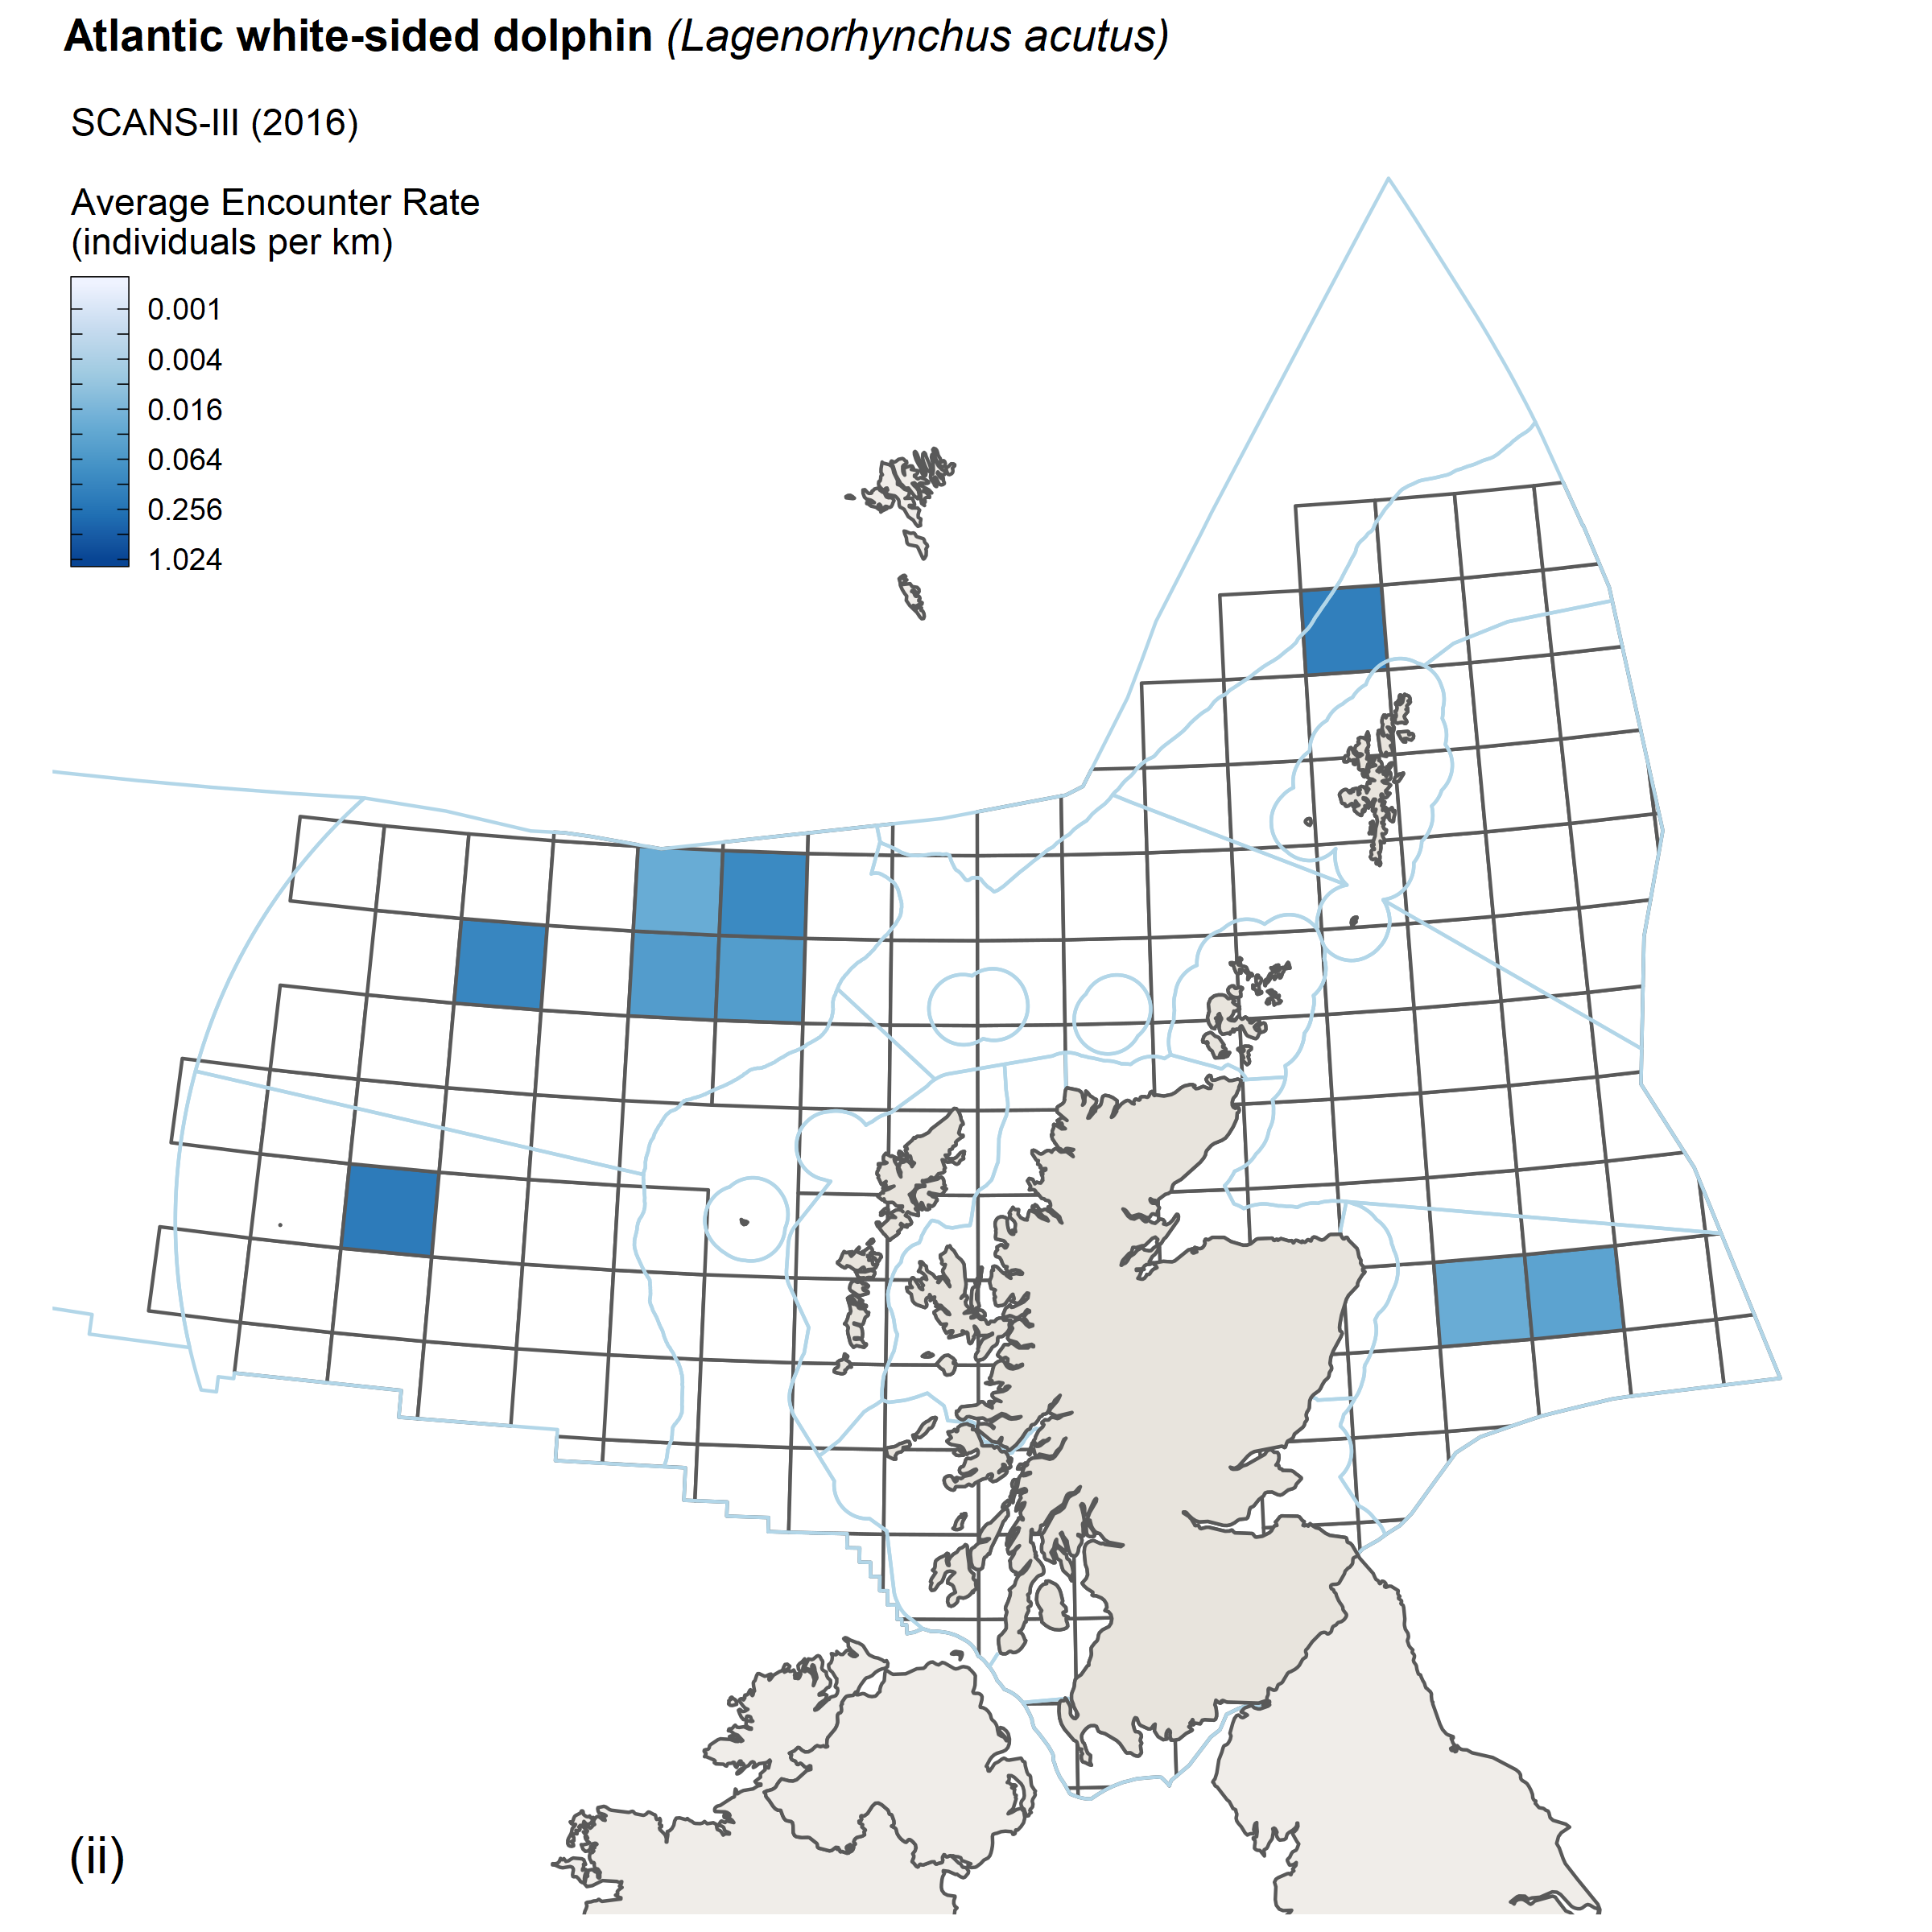 Encounter rates for Atlantic white sided dolphin from SCANS III